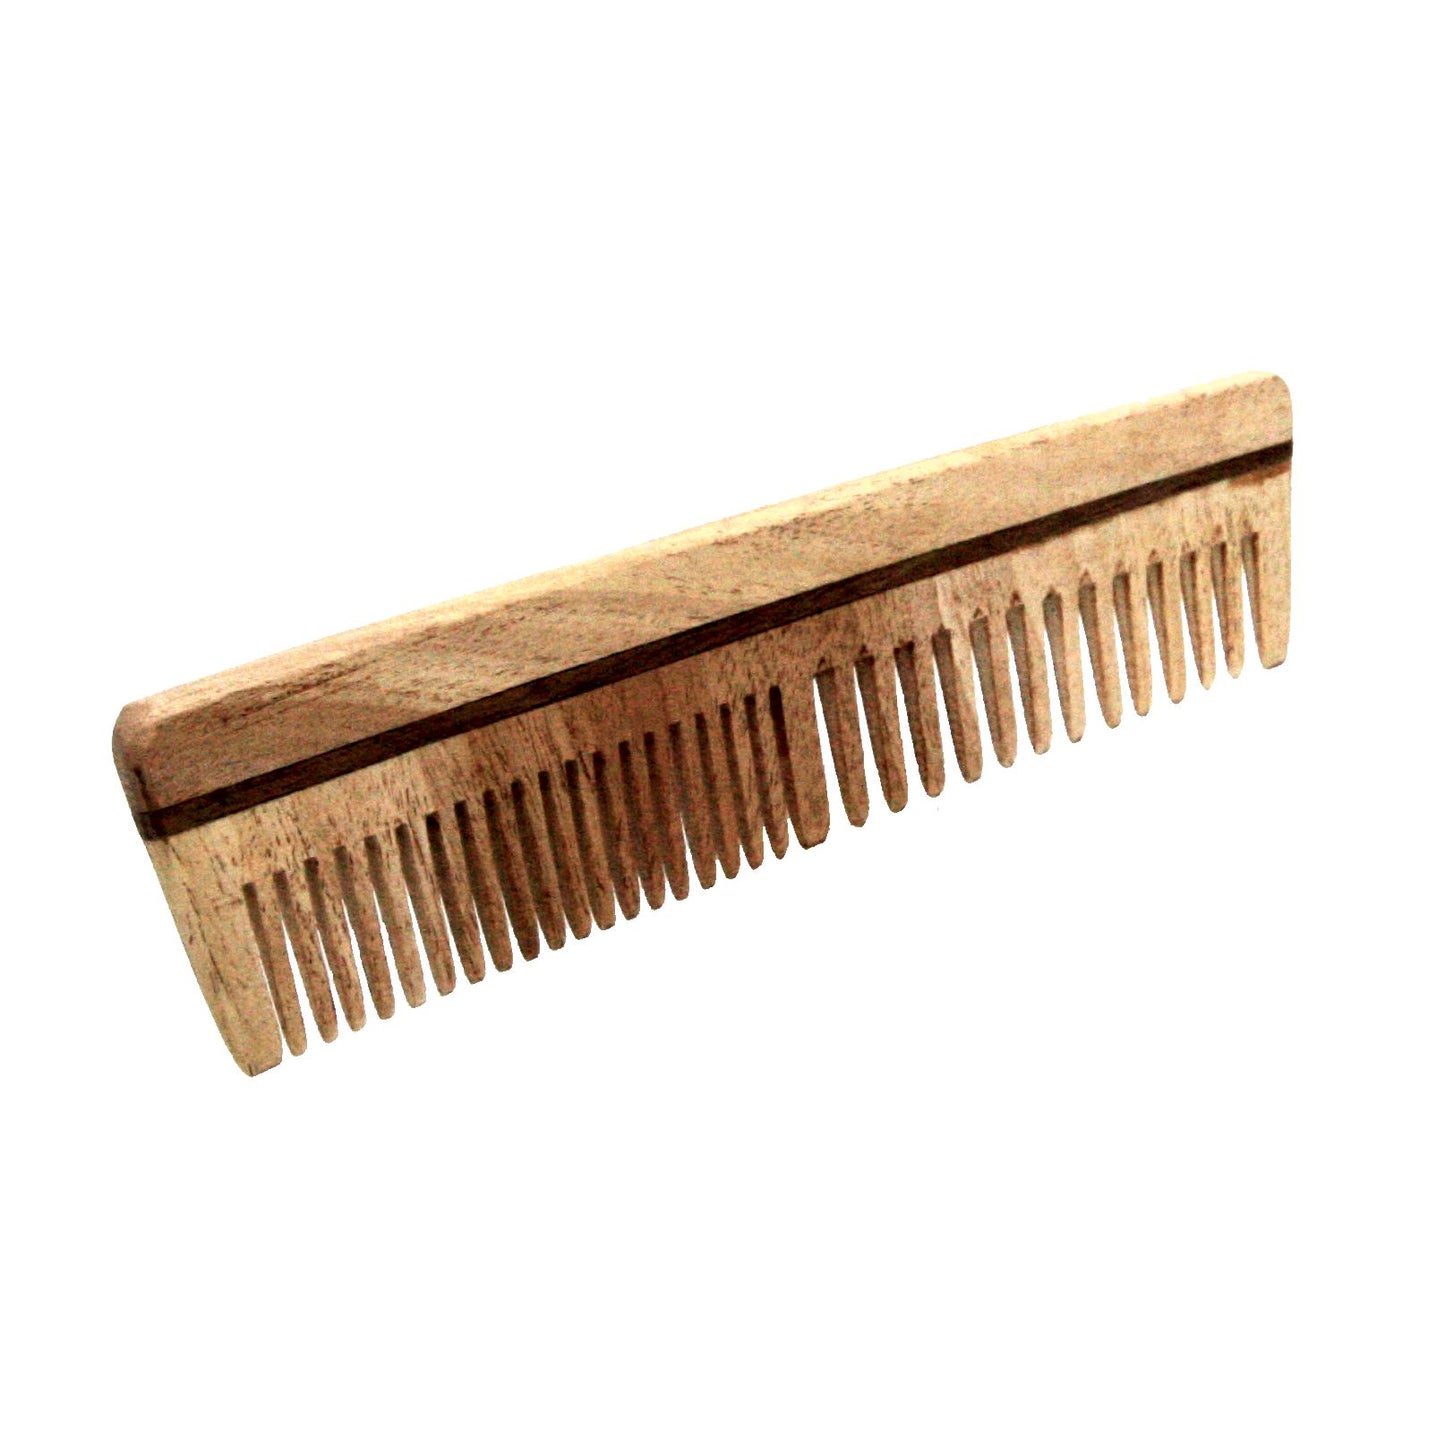 7.5in Wood Styling Extra Course Tooth Comb  - CLOSEOUT, LIMITED STOCK AVAILABLE